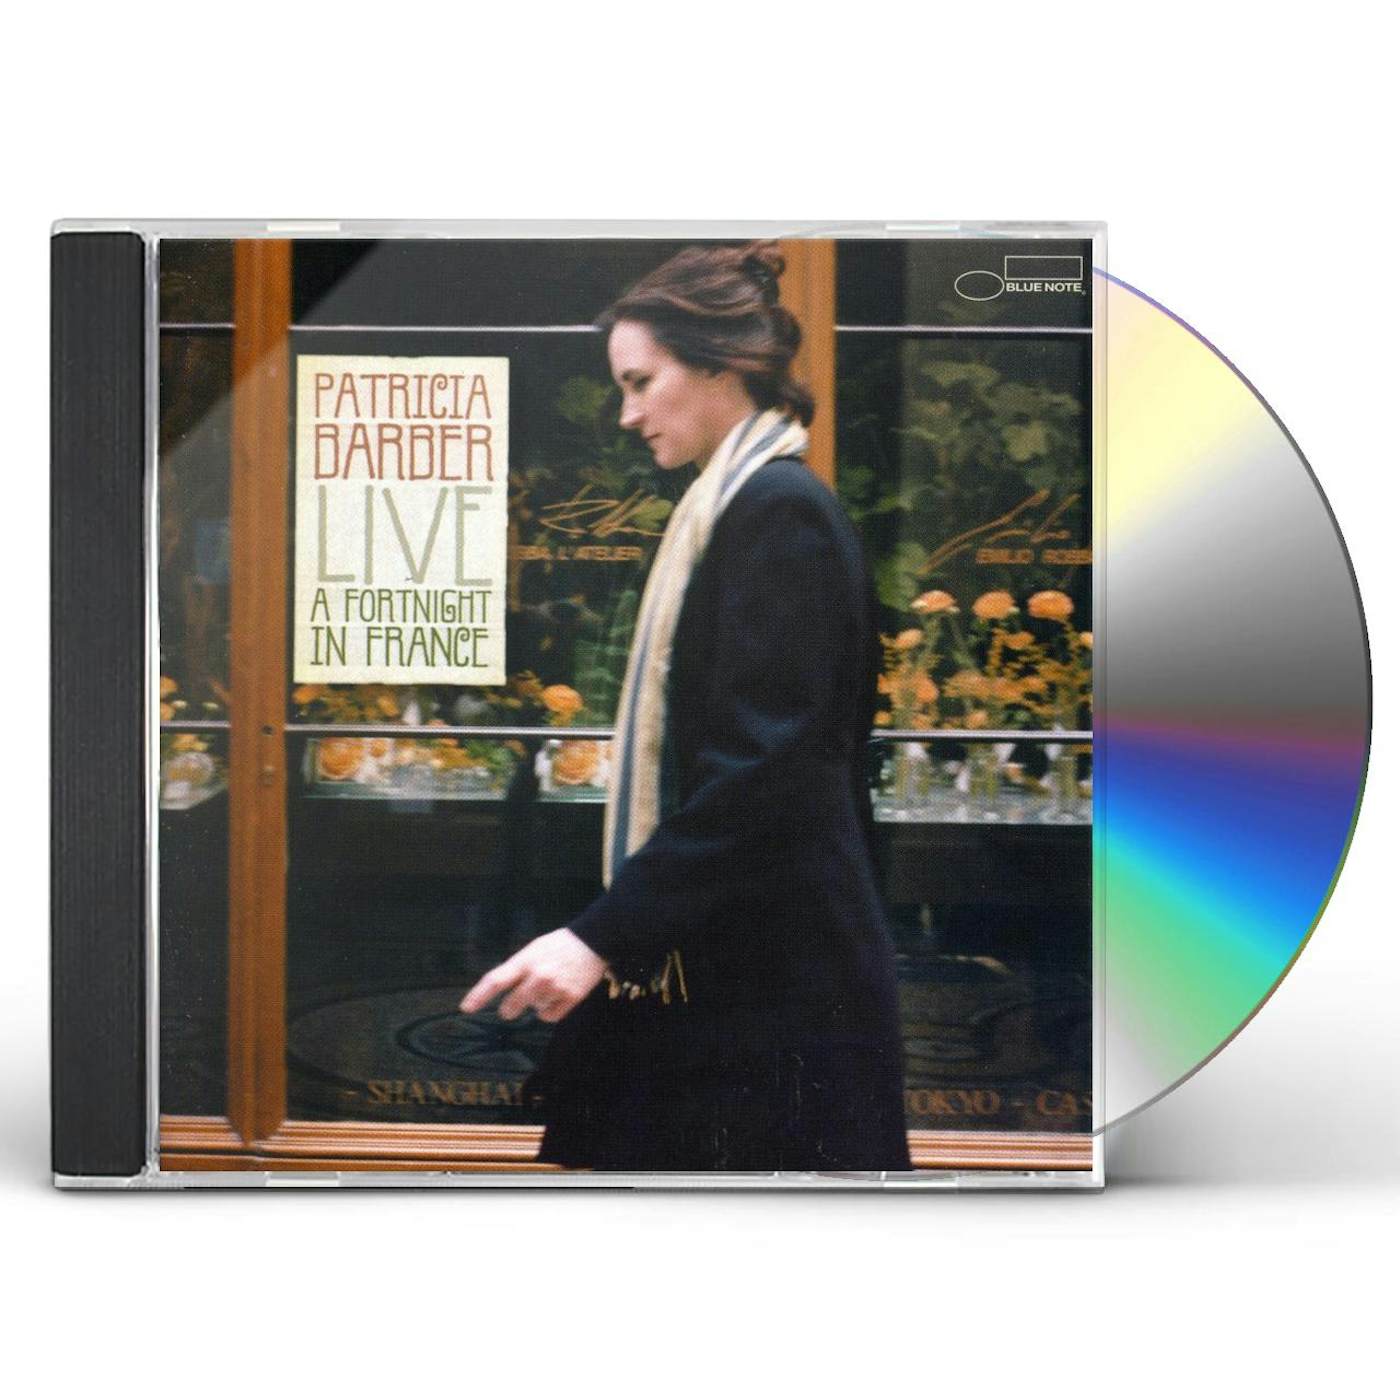 Patricia Barber LIVE: A FORTNIGHT IN FRANCE CD